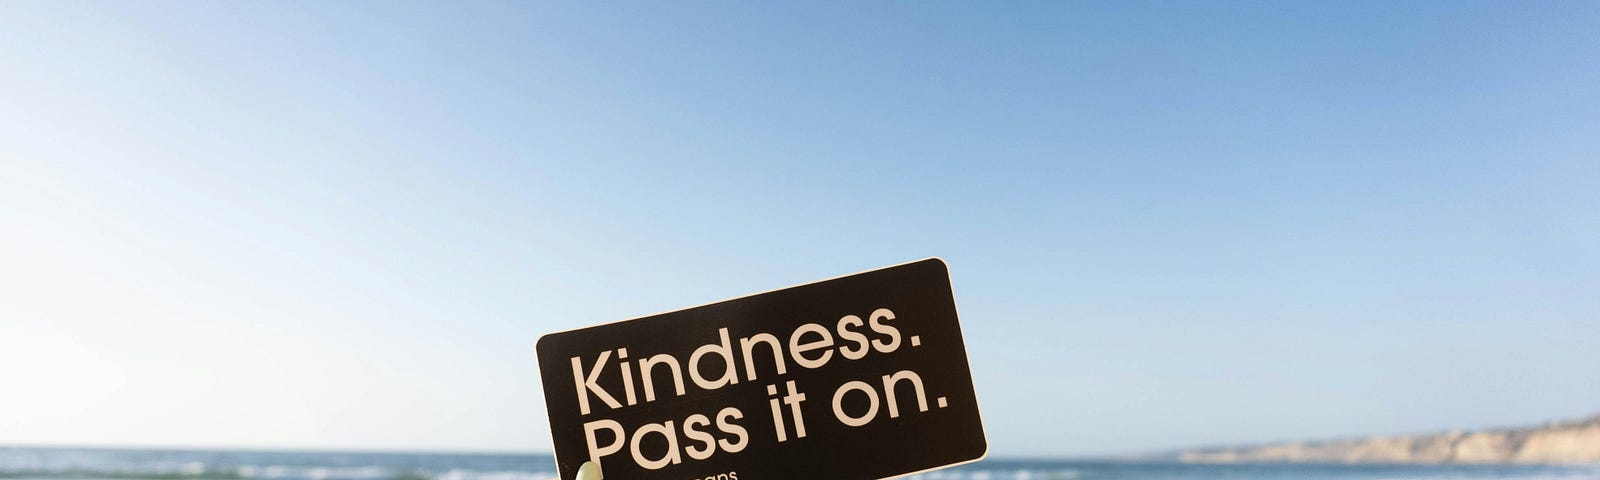 A woman’s hand holding a black card with the message “Kindness. Pass it on.”